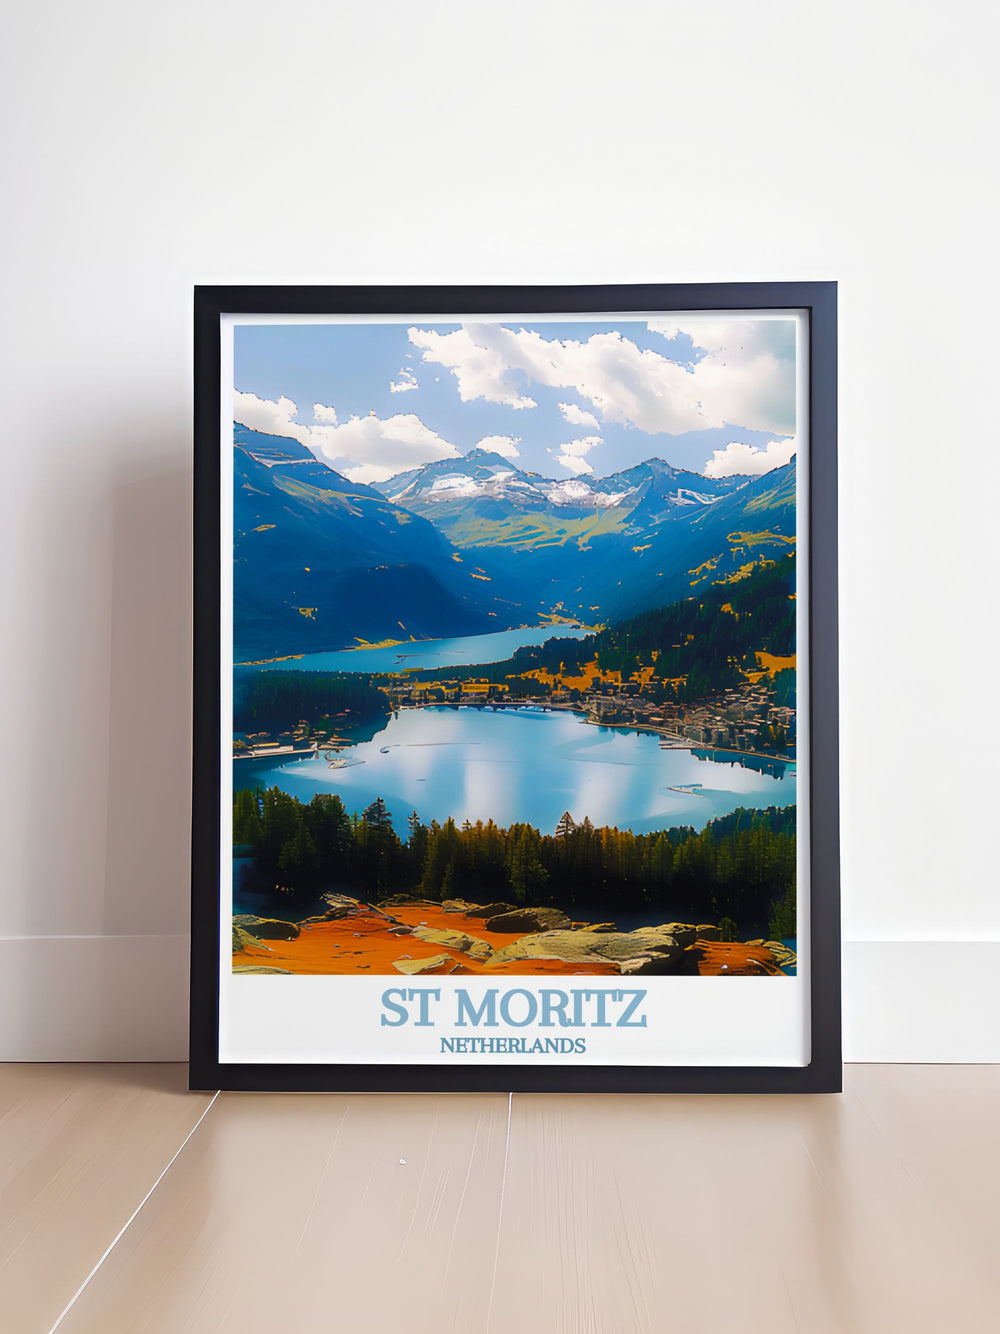 Discover the breathtaking landscapes and rich history of St Moritz through this vibrant poster, showcasing the elegance and adventure of Switzerlands iconic alpine resort.